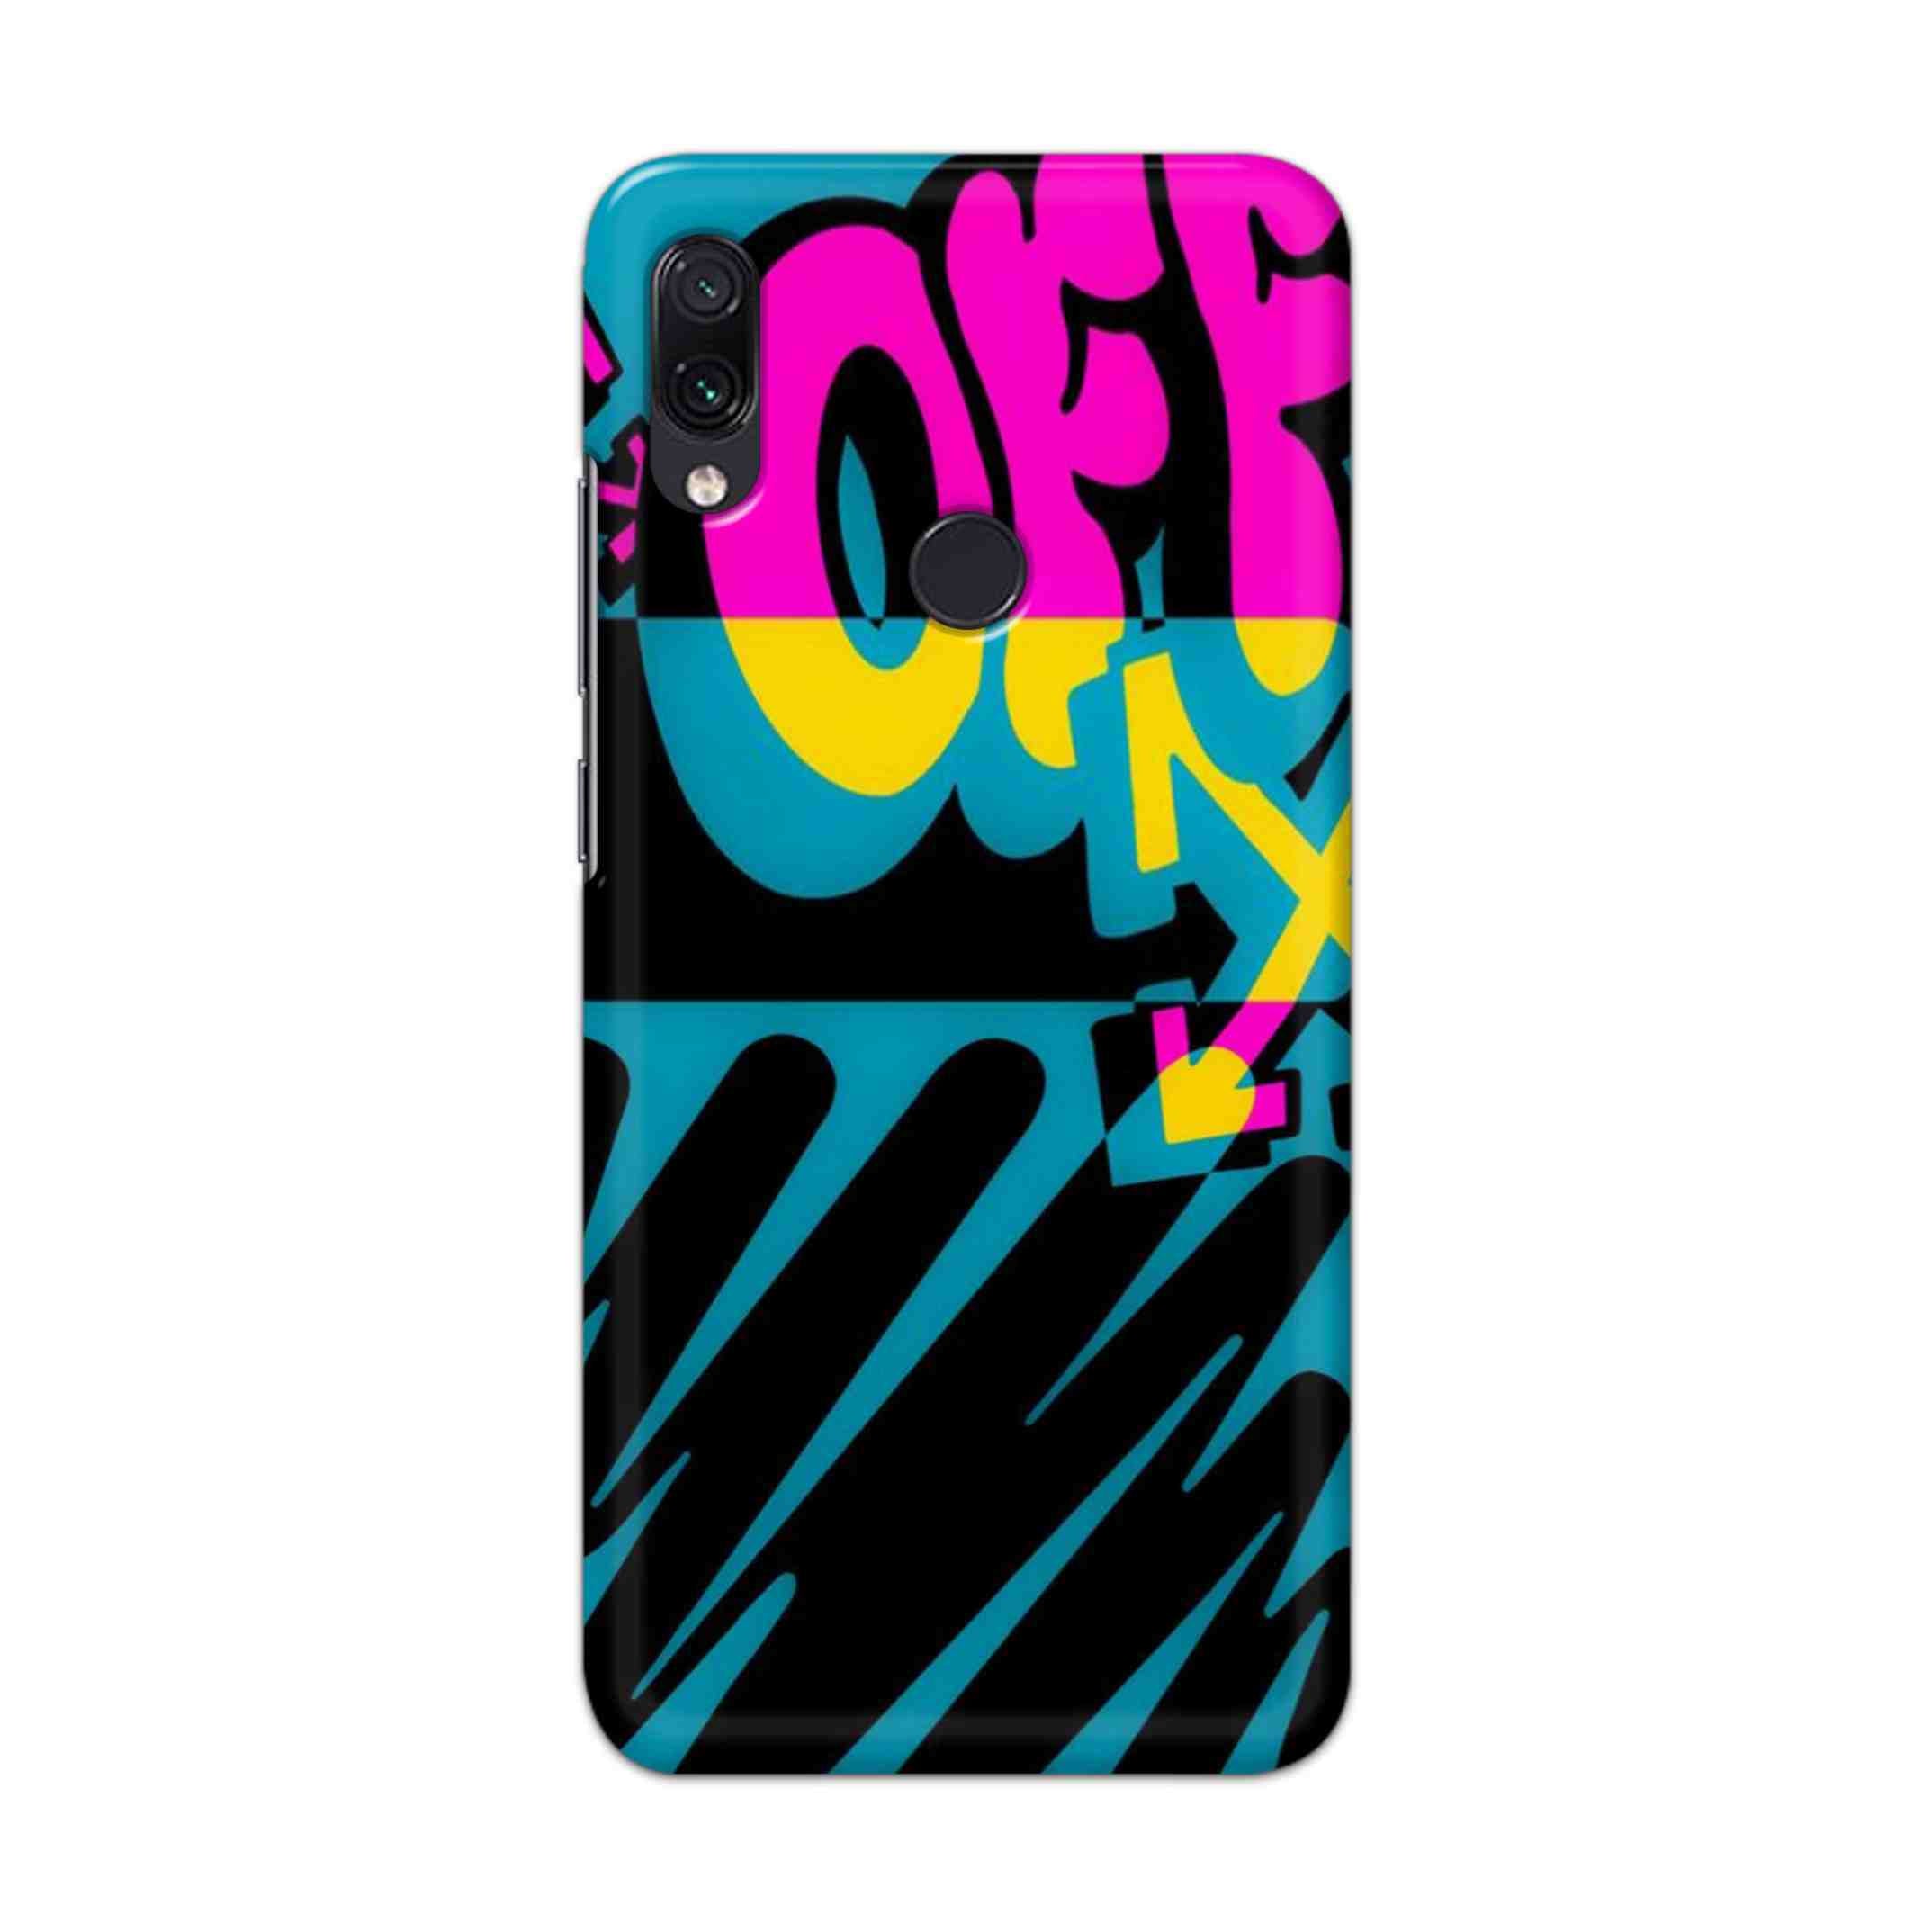 Buy Off Hard Back Mobile Phone Case Cover For Redmi Note 7 / Note 7 Pro Online